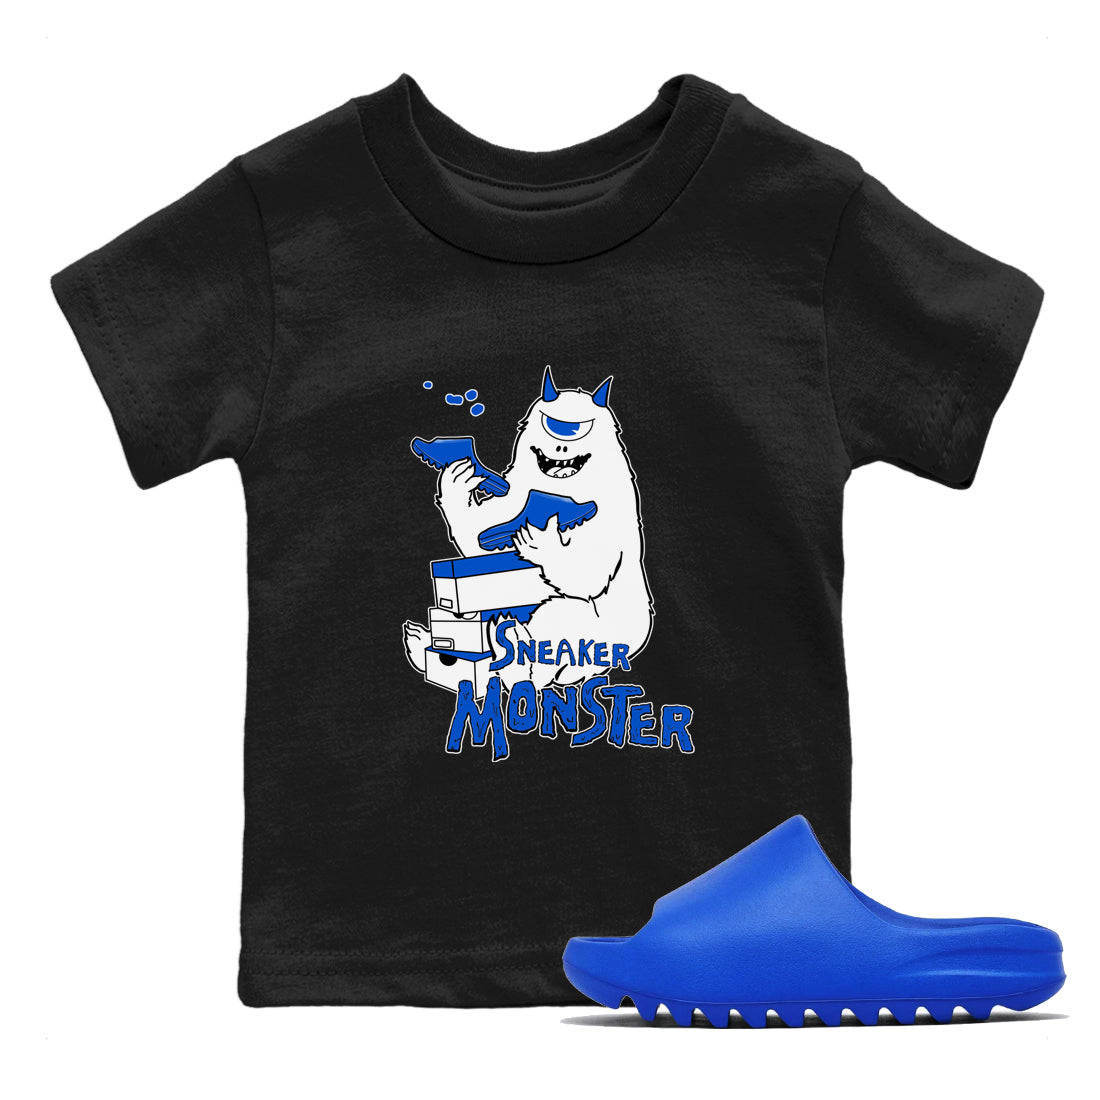 Yeezy Slide Azure shirts to match jordans Sneaker Monster sneaker match tees Yeezy Slide Azure SNRT Sneaker Tees streetwear brand Baby and Youth Black 1 cotton tee